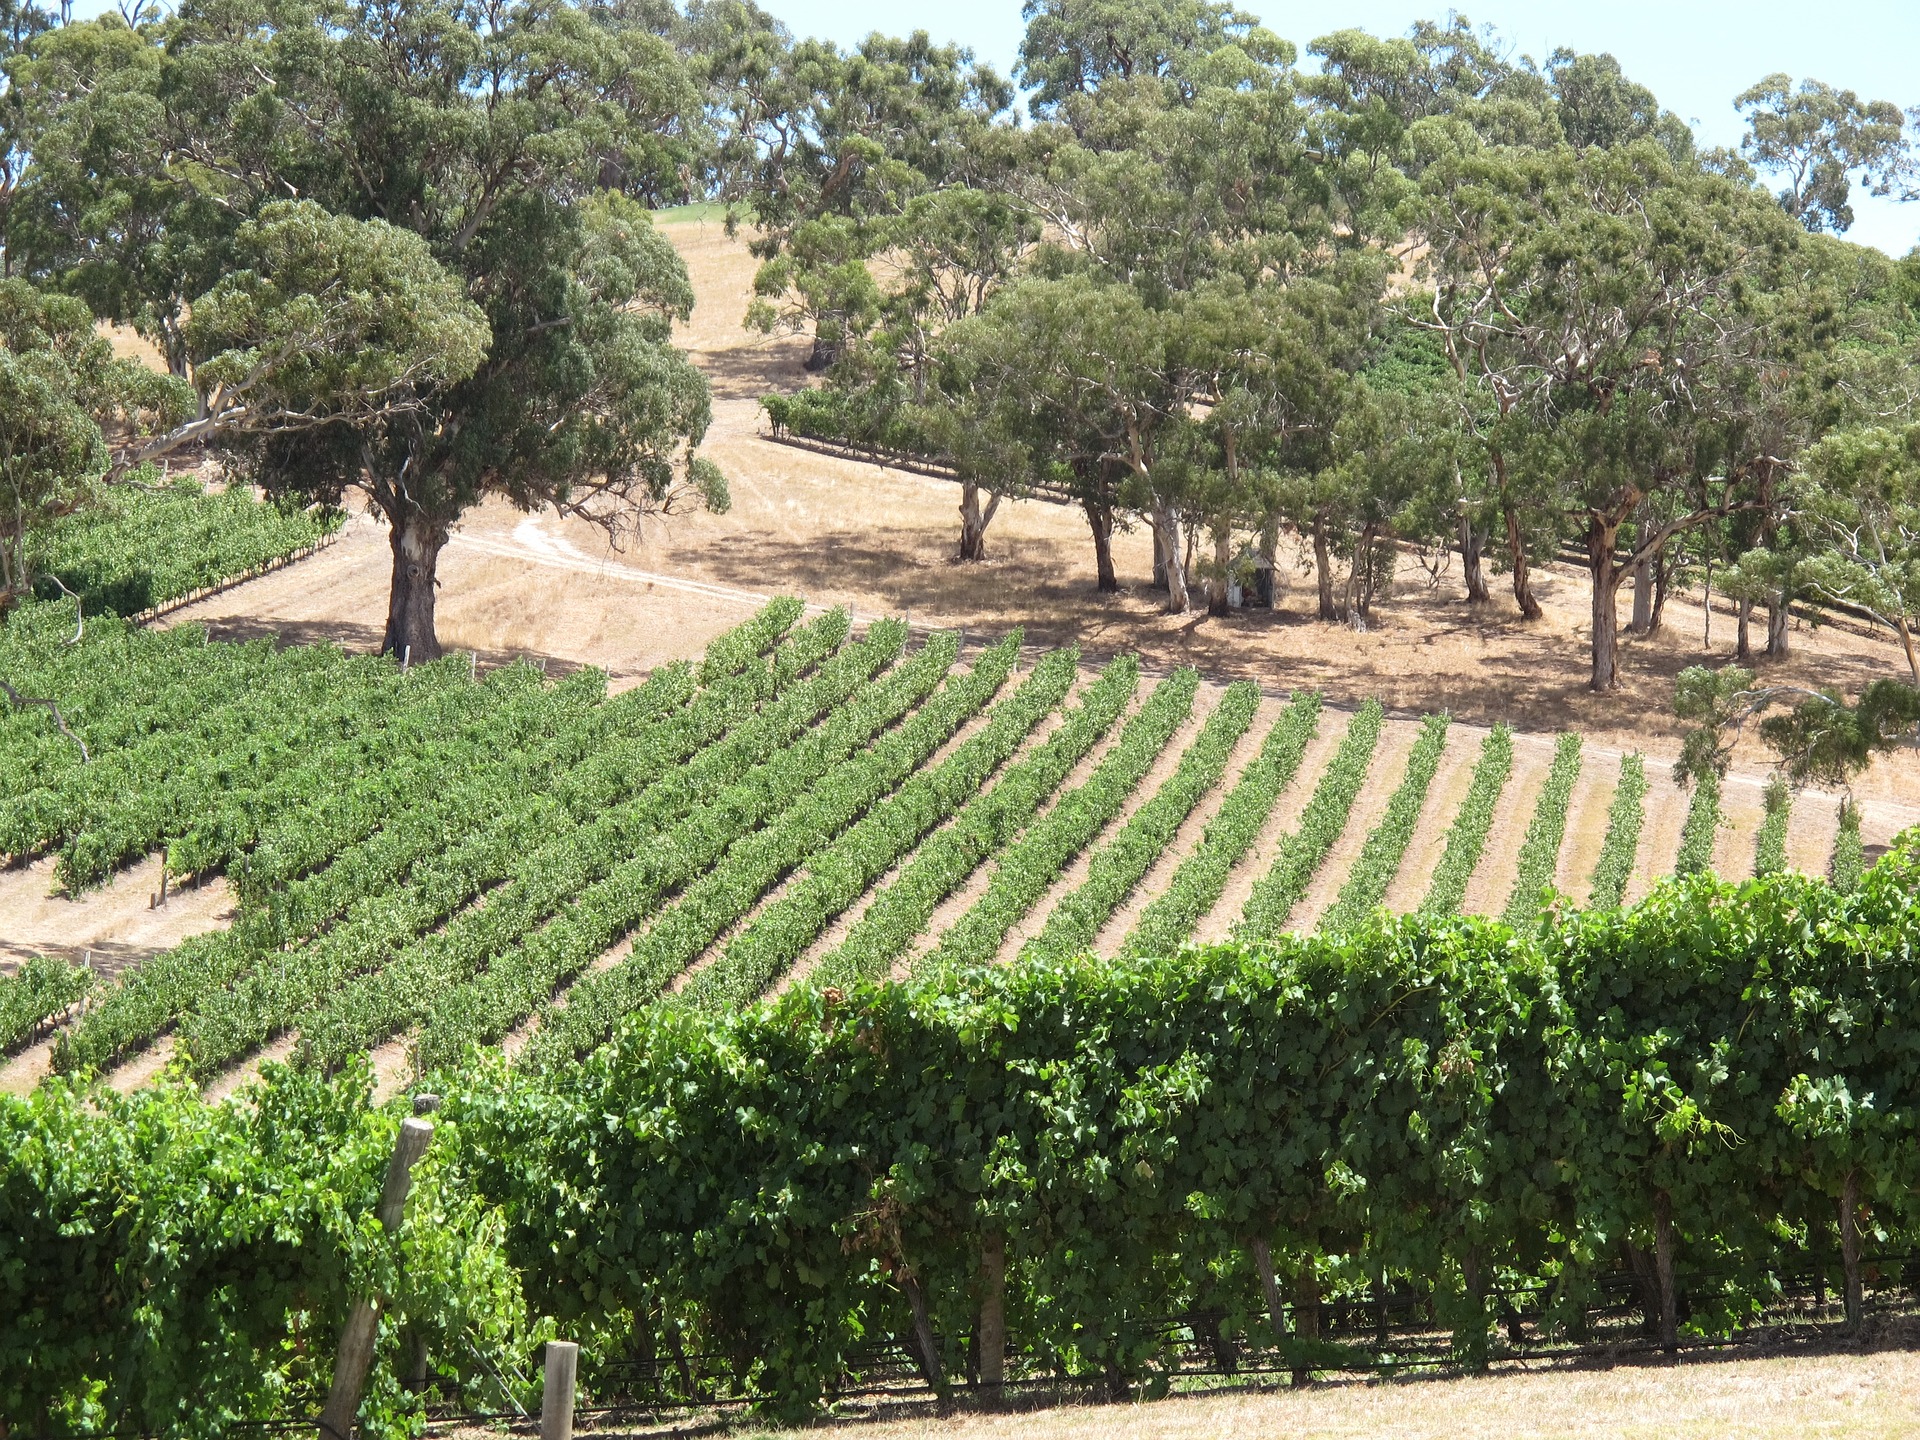 An image of a vineyard in Adelaide Australia